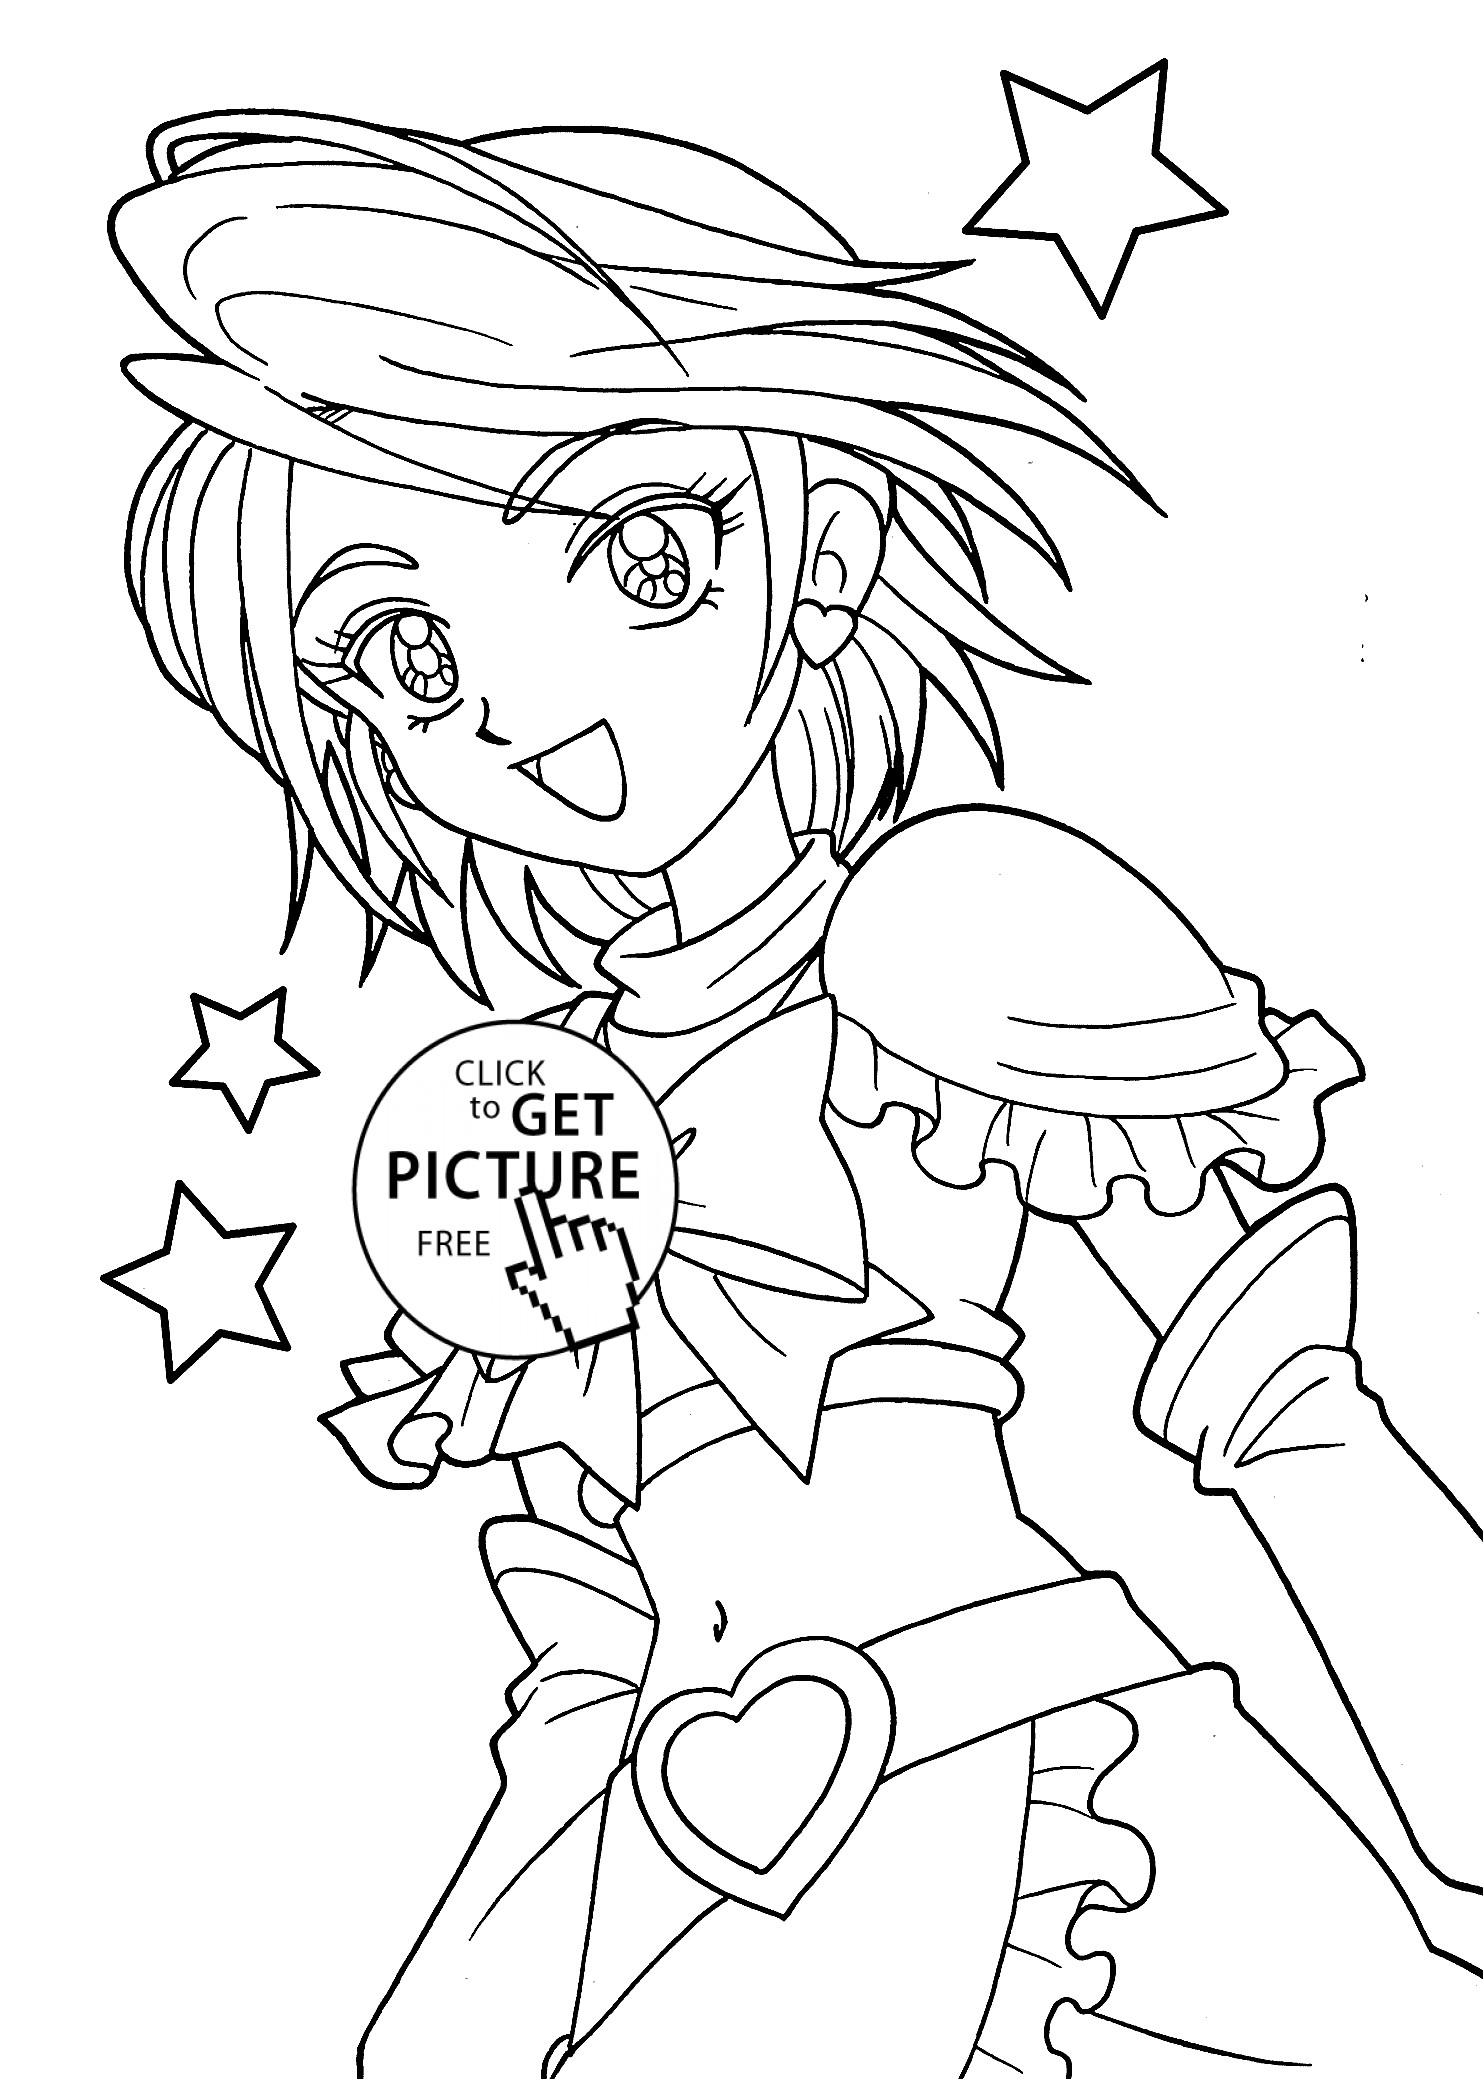 Online Printable Coloring Pages For Girls
 Pretty cure coloring pages for girls printable free